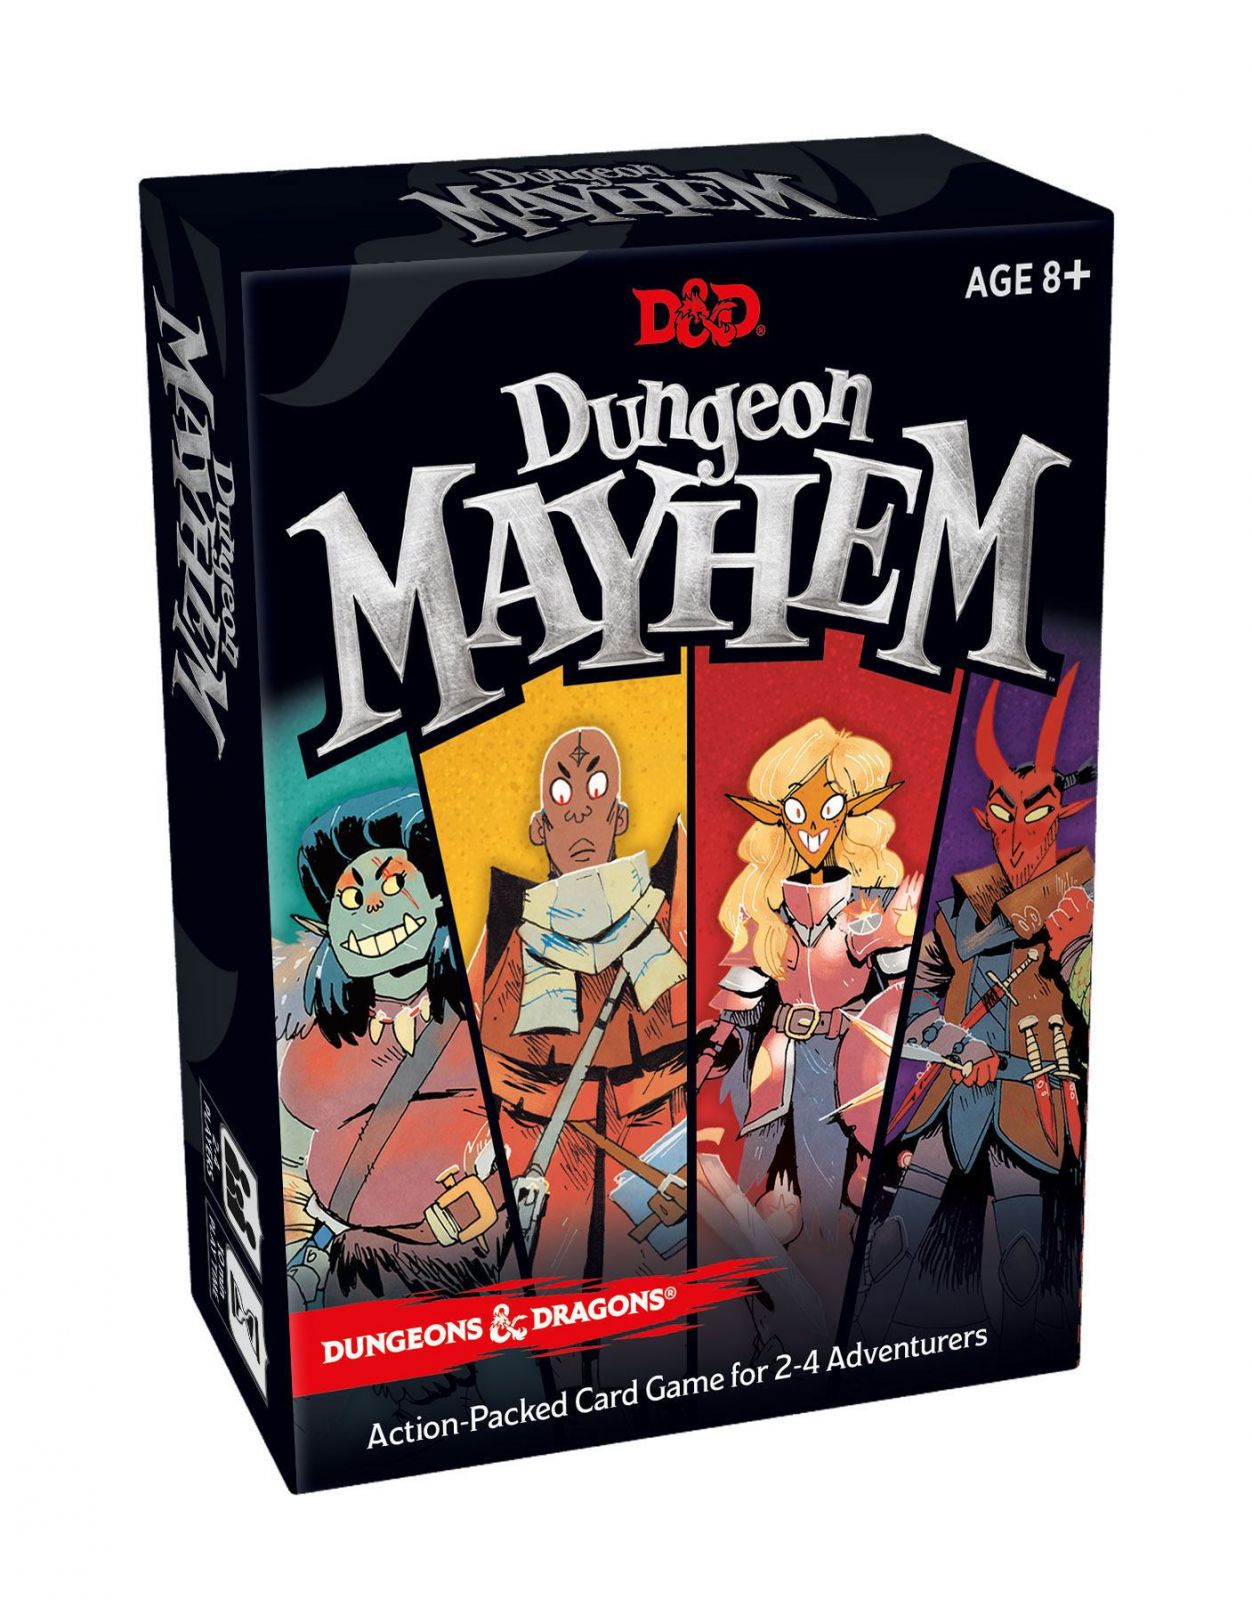 Dungeons & Dragons Card Game Dungeon Mayhem Francouzská Wizards of the Coast